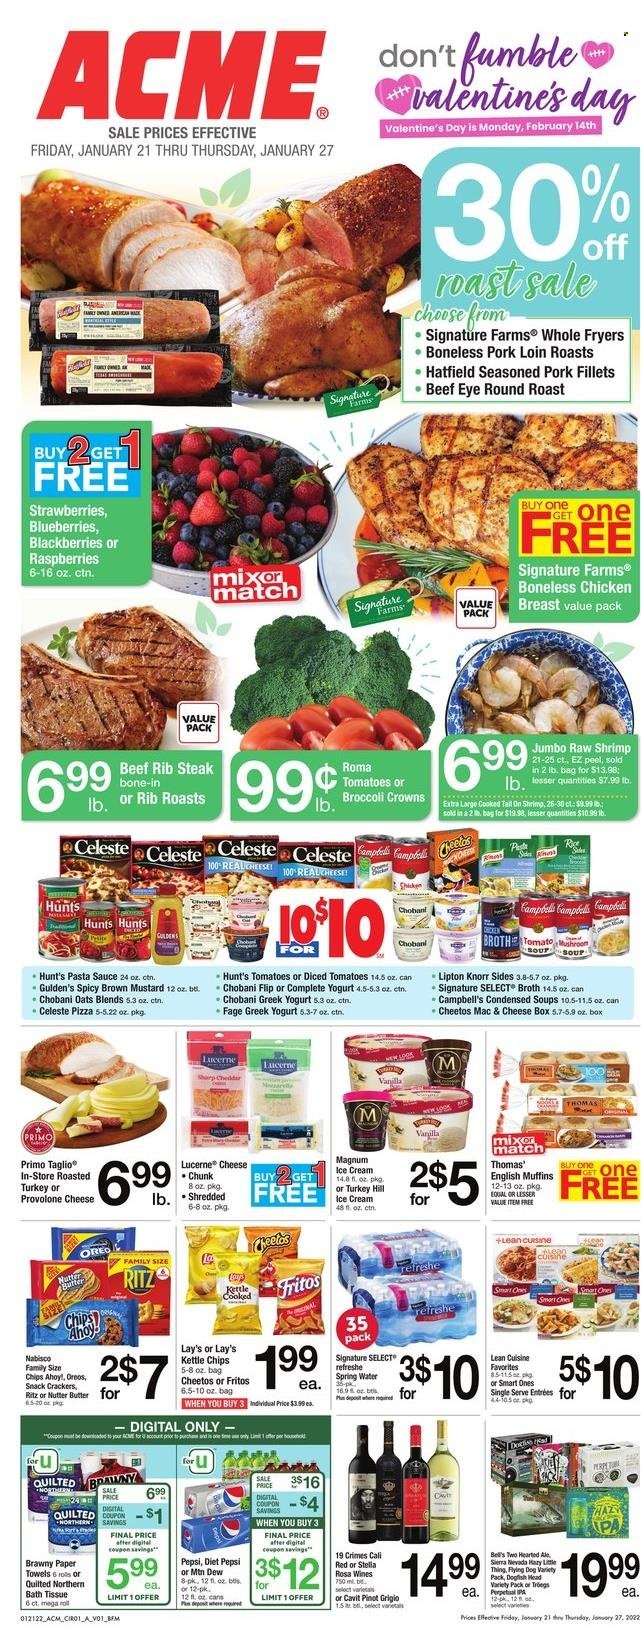 thumbnail - ACME Flyer - 01/21/2022 - 01/27/2022 - Sales products - english muffins, blackberries, blueberries, strawberries, shrimps, Campbell's, pizza, pasta sauce, Knorr, sauce, Lean Cuisine, greek yoghurt, Oreo, yoghurt, Chobani, butter, ice cream, Celeste, snack, crackers, RITZ, Fritos, Cheetos, chips, Lay’s, kettle, oats, broth, mustard, Mountain Dew, Pepsi, Lipton, spring water, white wine, Pinot Grigio, chicken breasts, beef meat, steak, eye of round, round roast, pork loin, pork meat, bath tissue, Quilted Northern, paper, towel, mixer. Page 1.